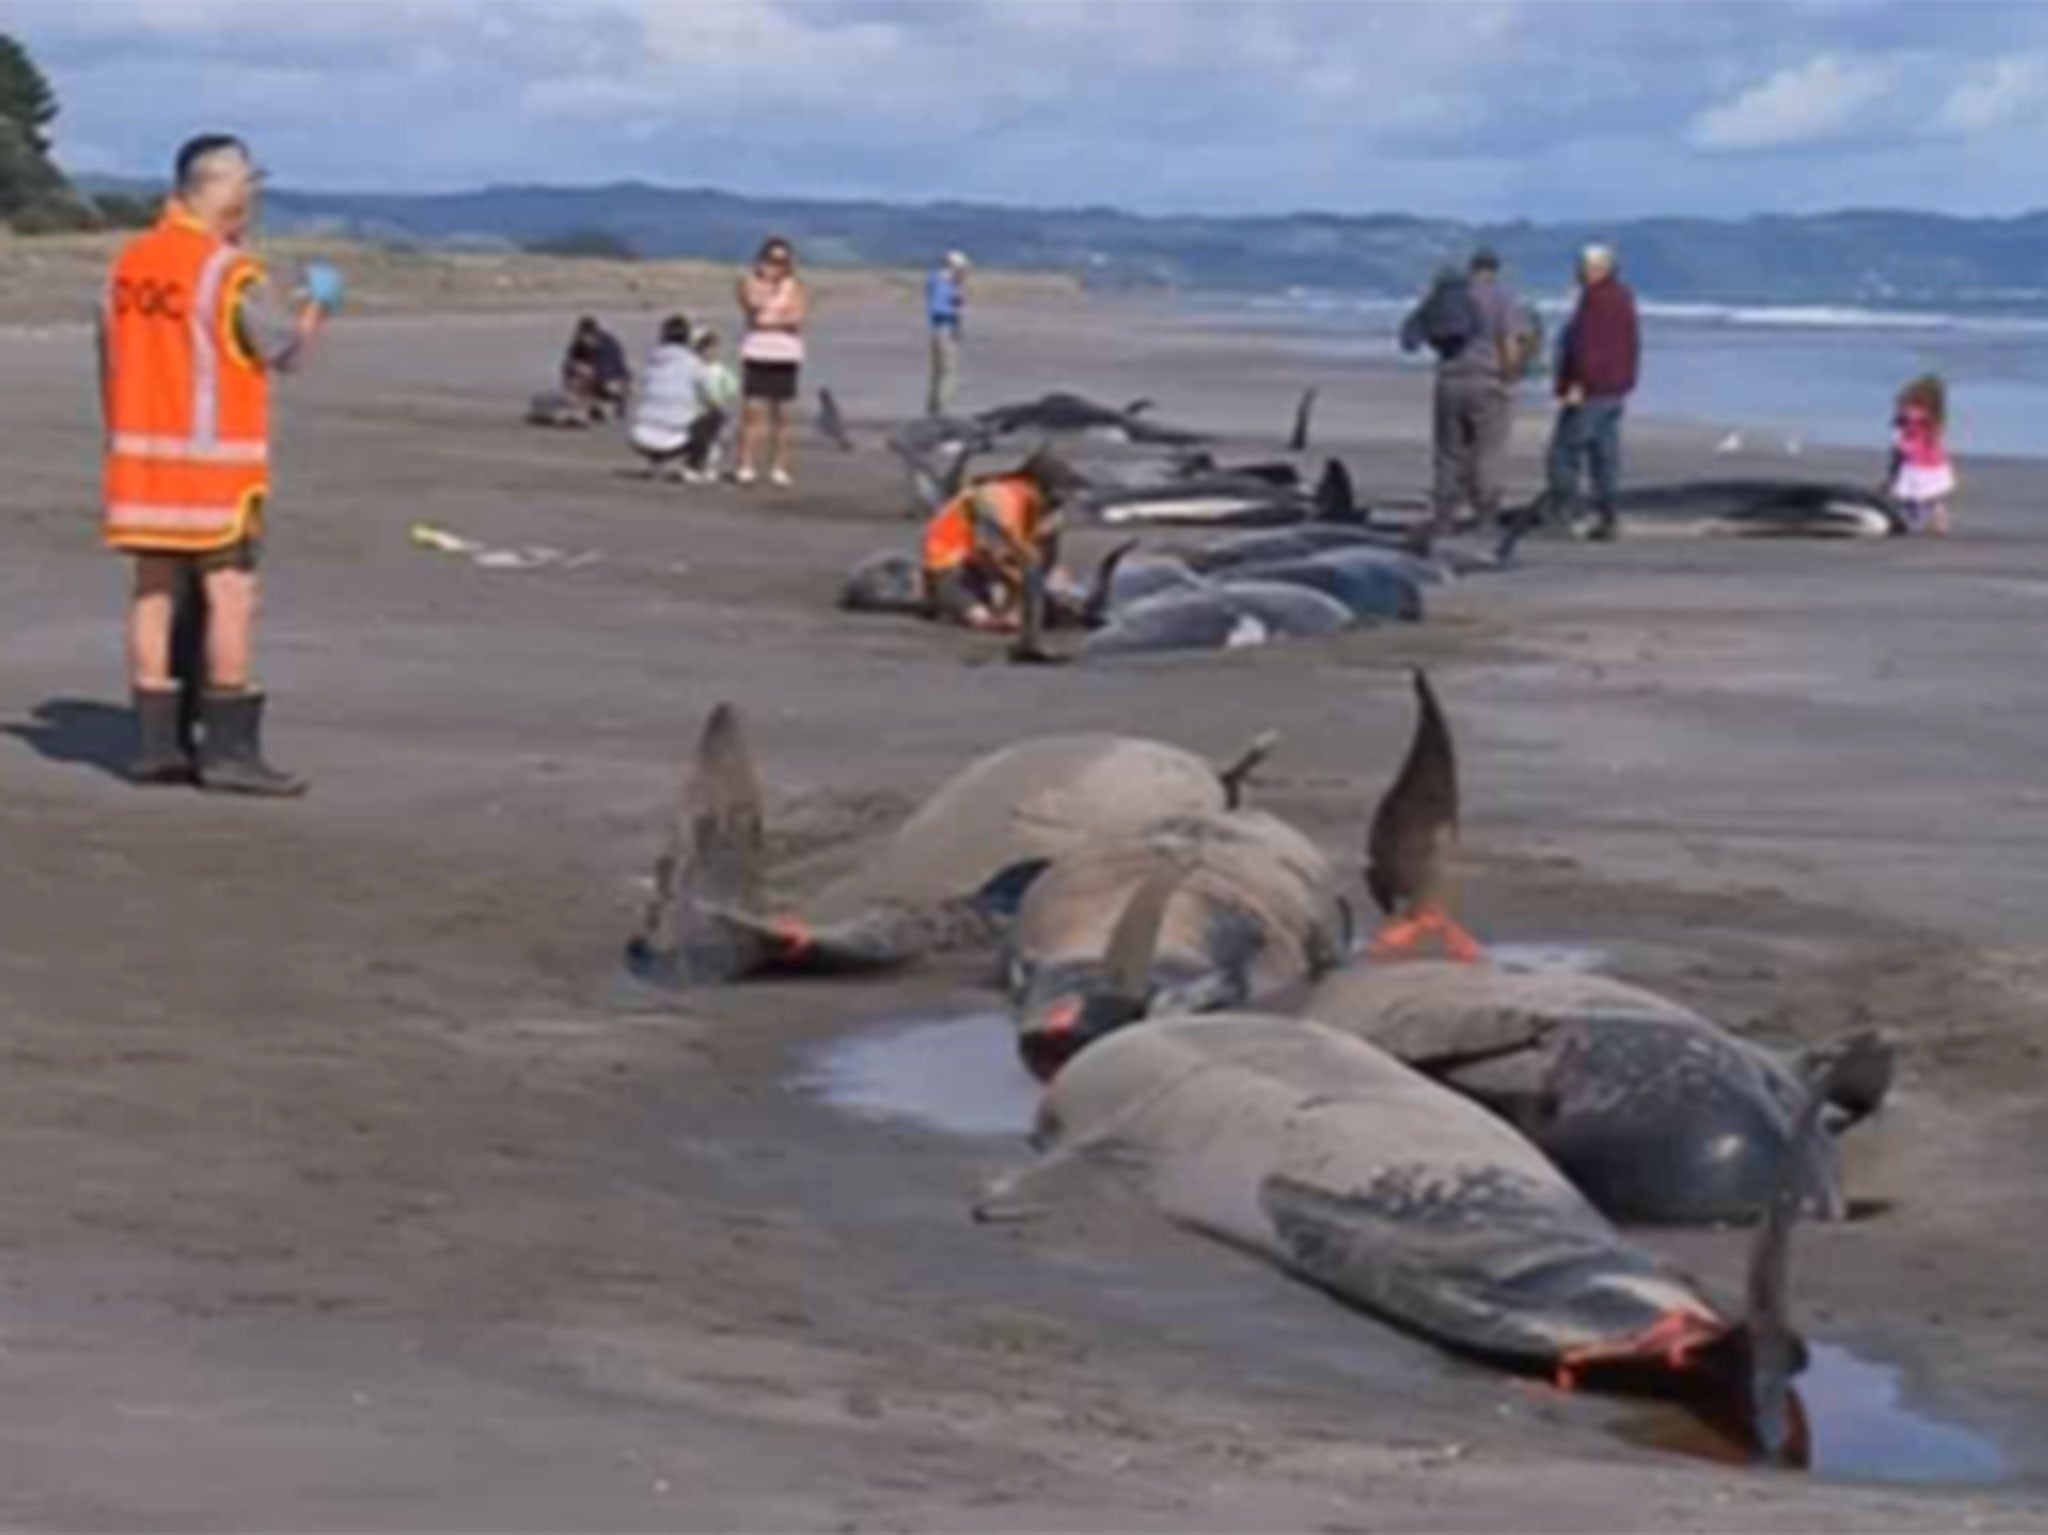 40 pilot whales had to be buried and 10 were euthanised in northern New Zealand, the country’s Department of Conservation (DOC) confirmed on Thursday.